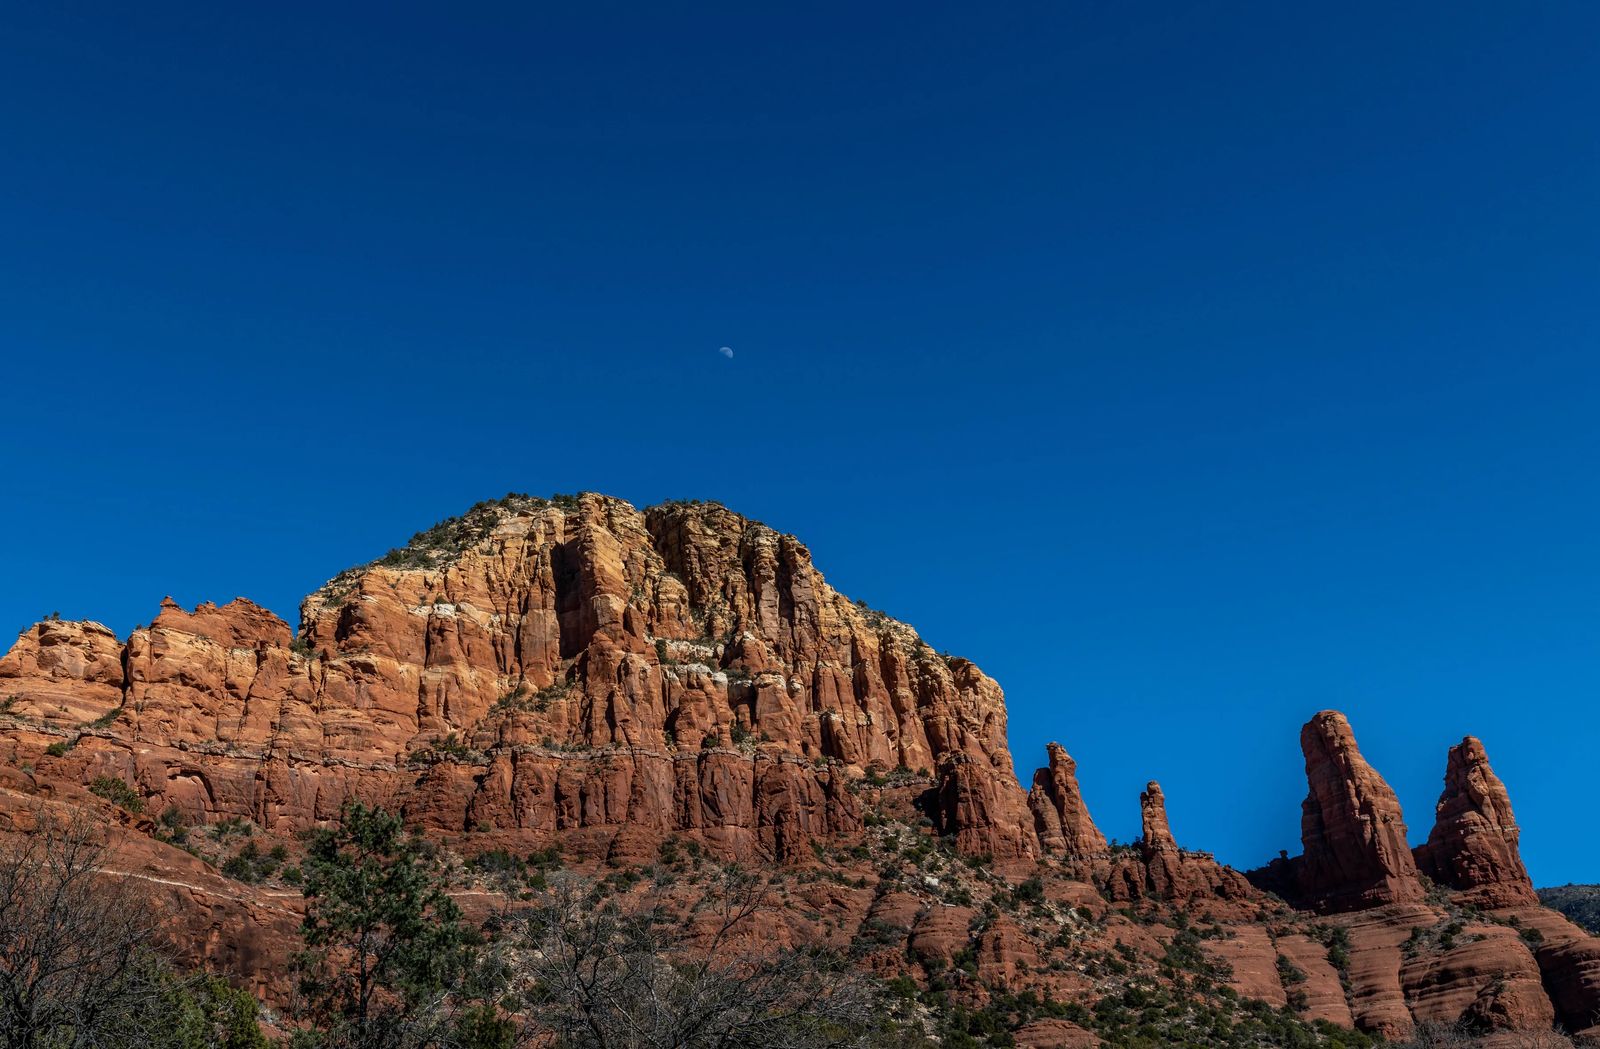 Crescent Moon over a setting sun on red rocks - Things to do in Sedona